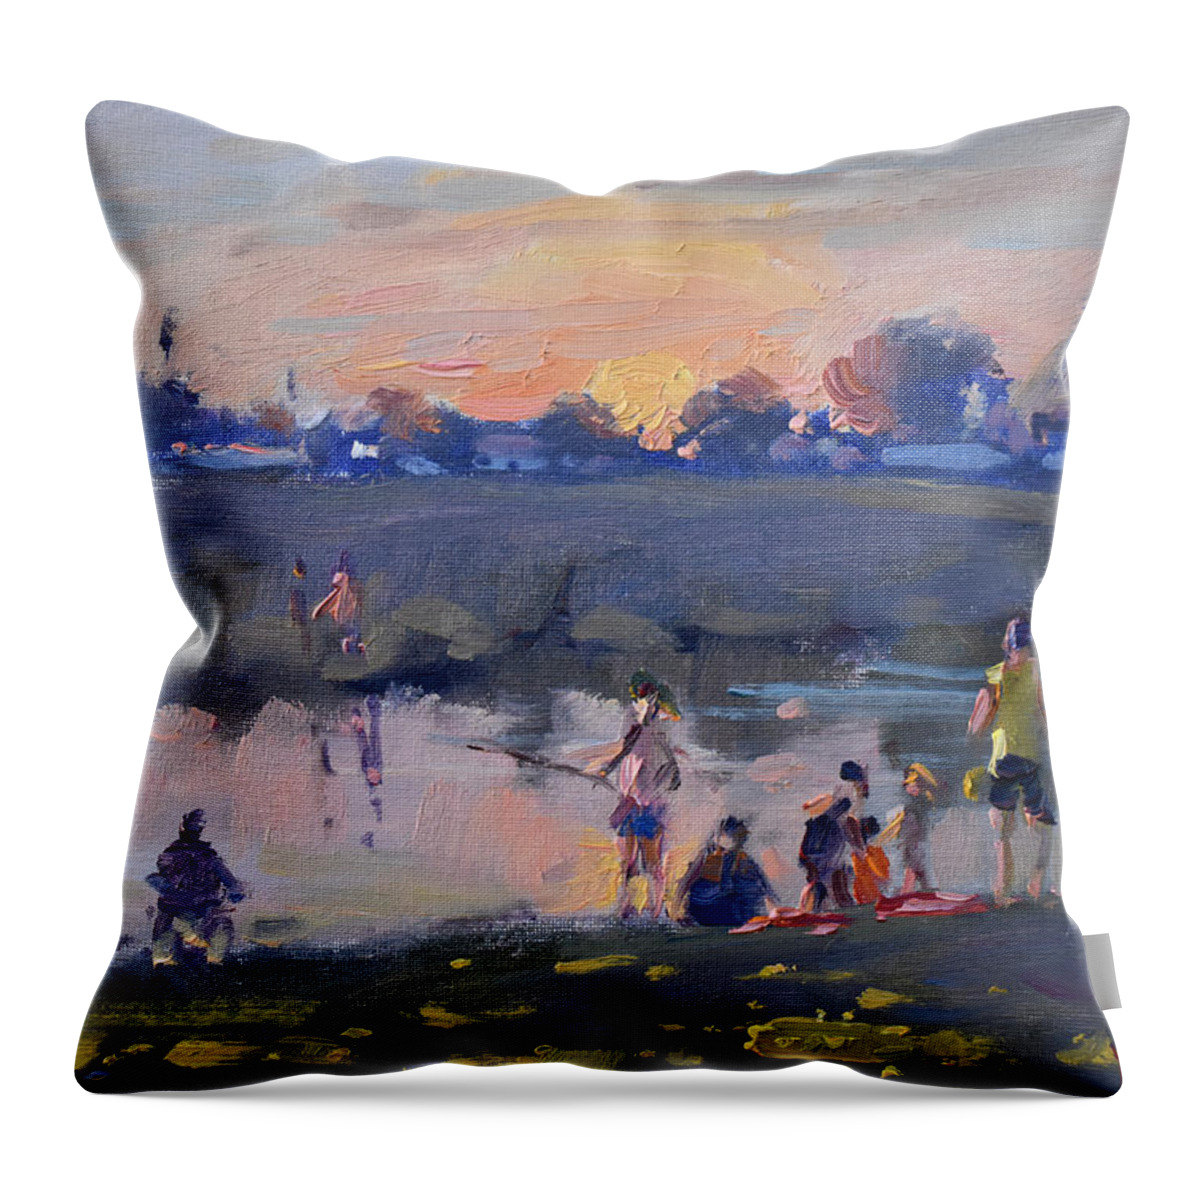 Phishing Throw Pillow featuring the painting Phishing in the Pond by Ylli Haruni